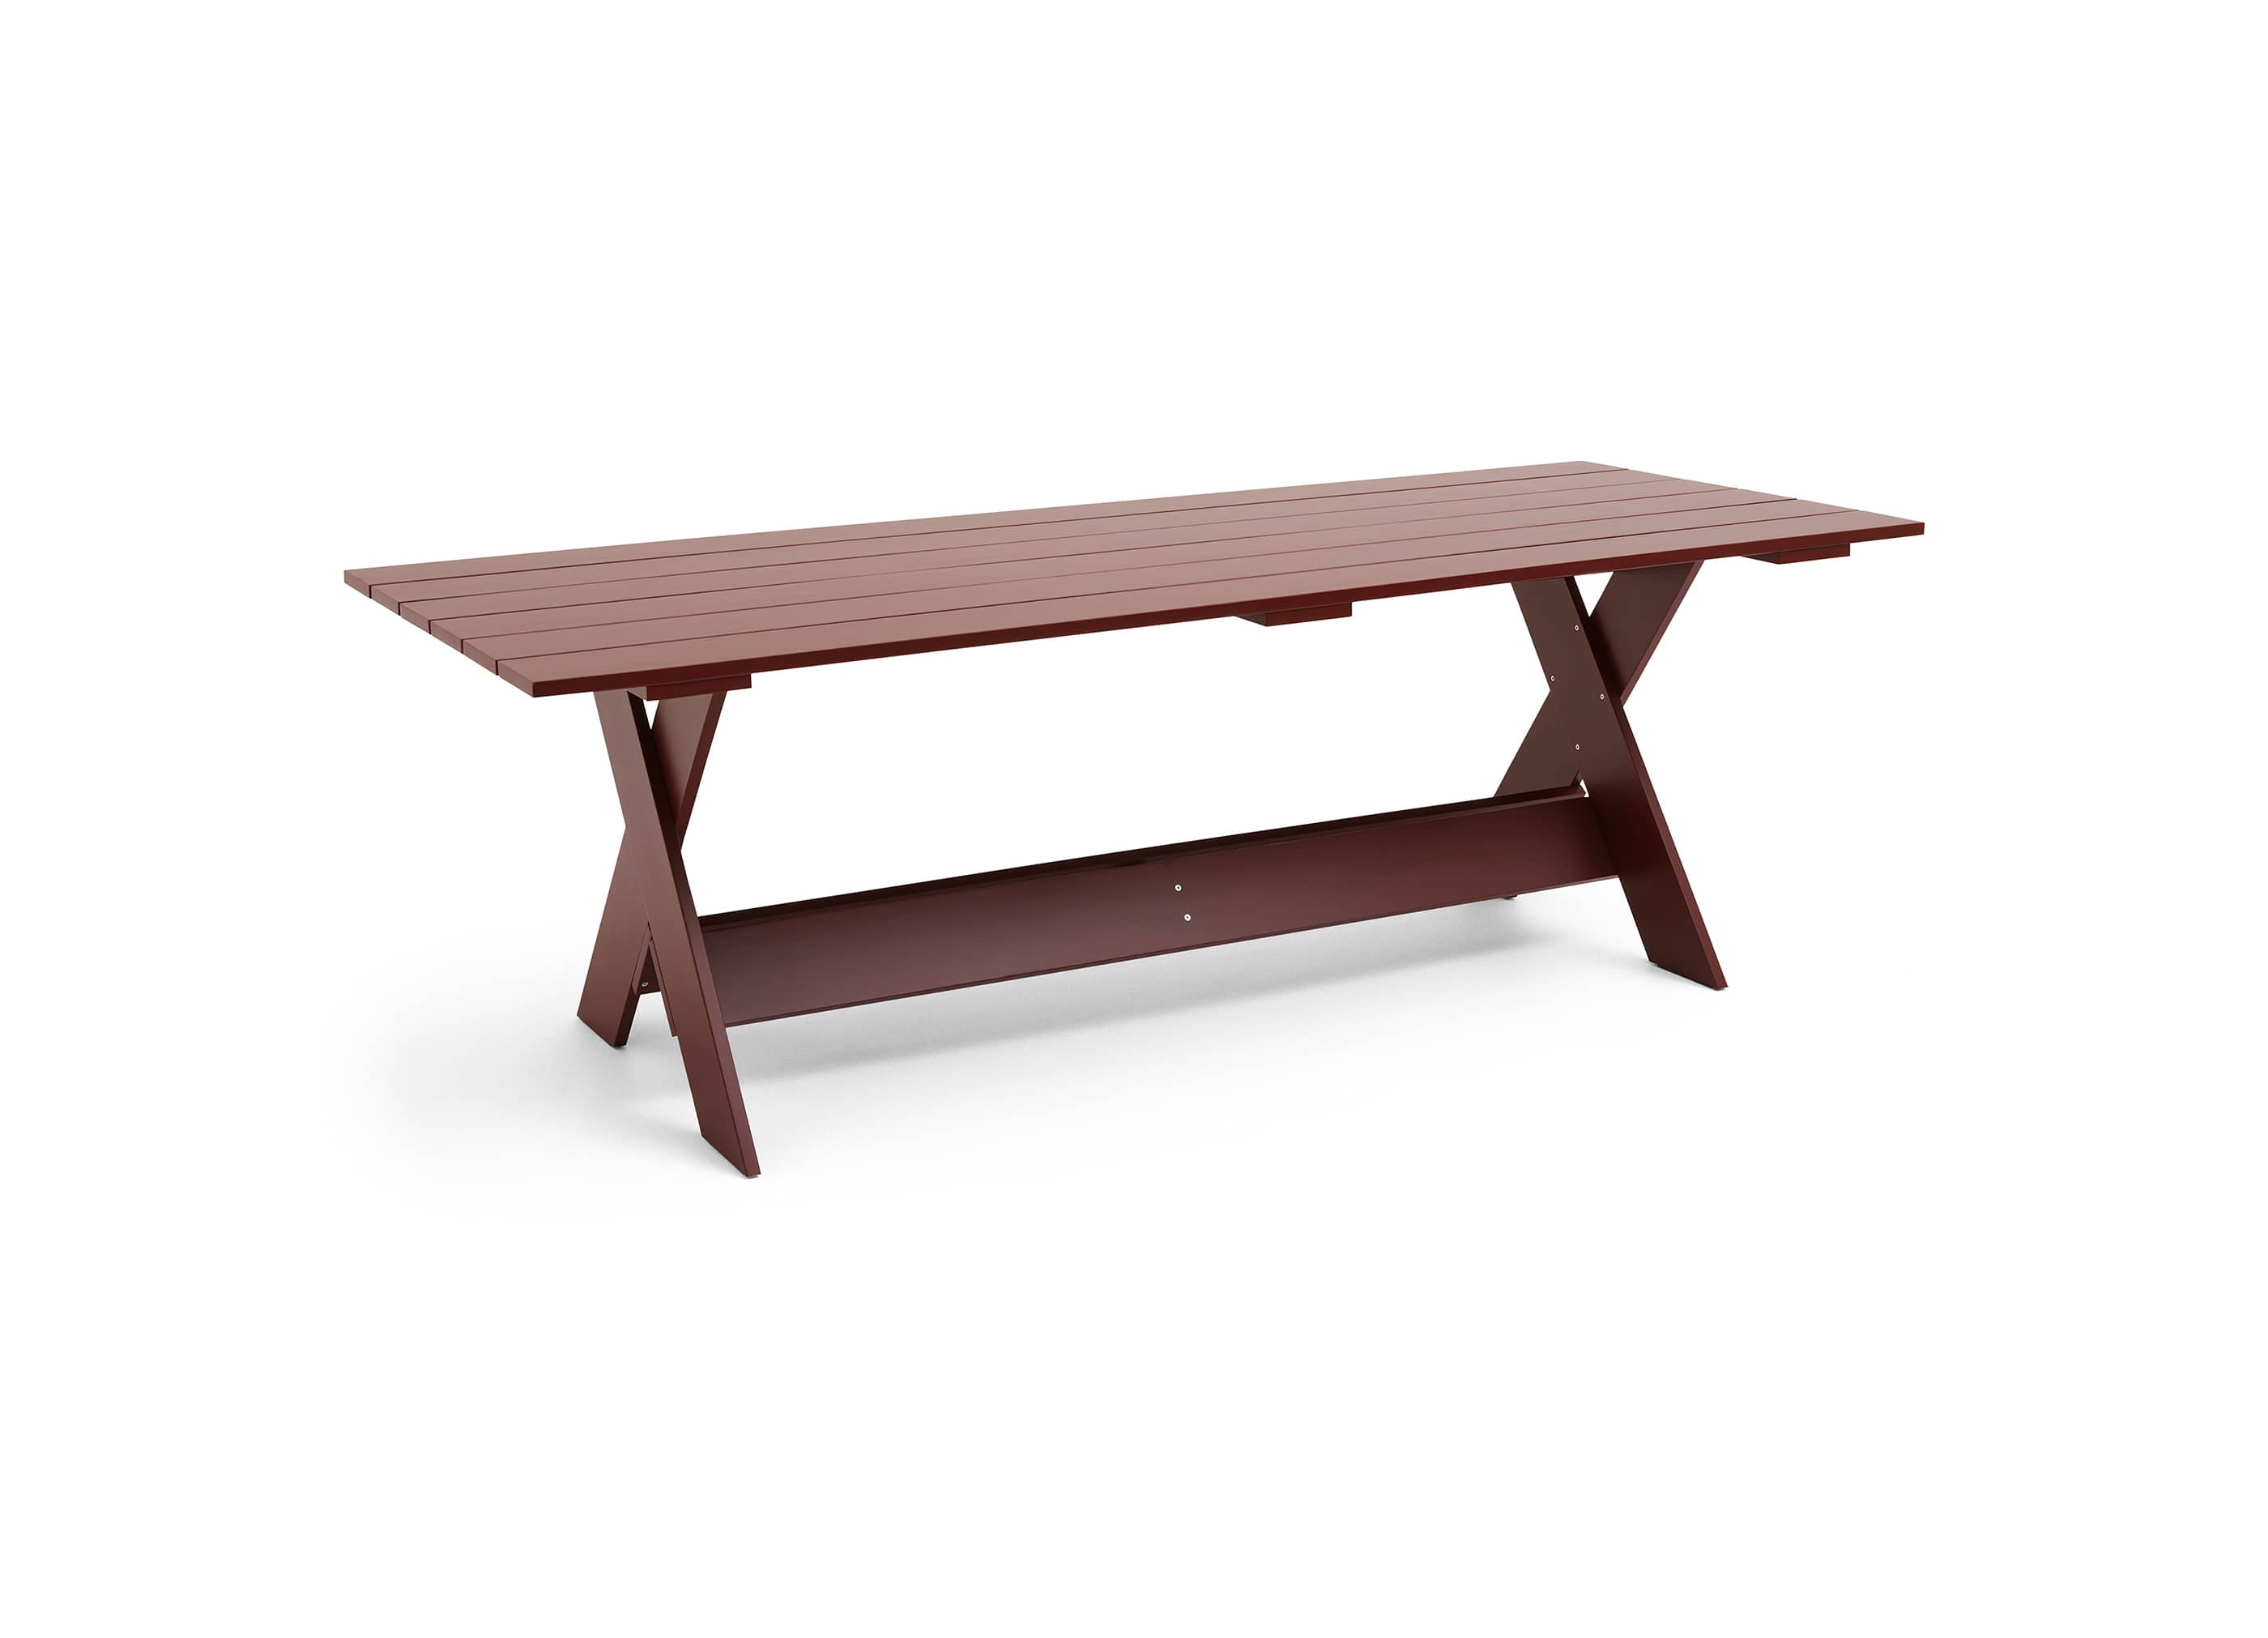 CRATE DINING TABLE / L230 x W89.5 x H74.5 cm